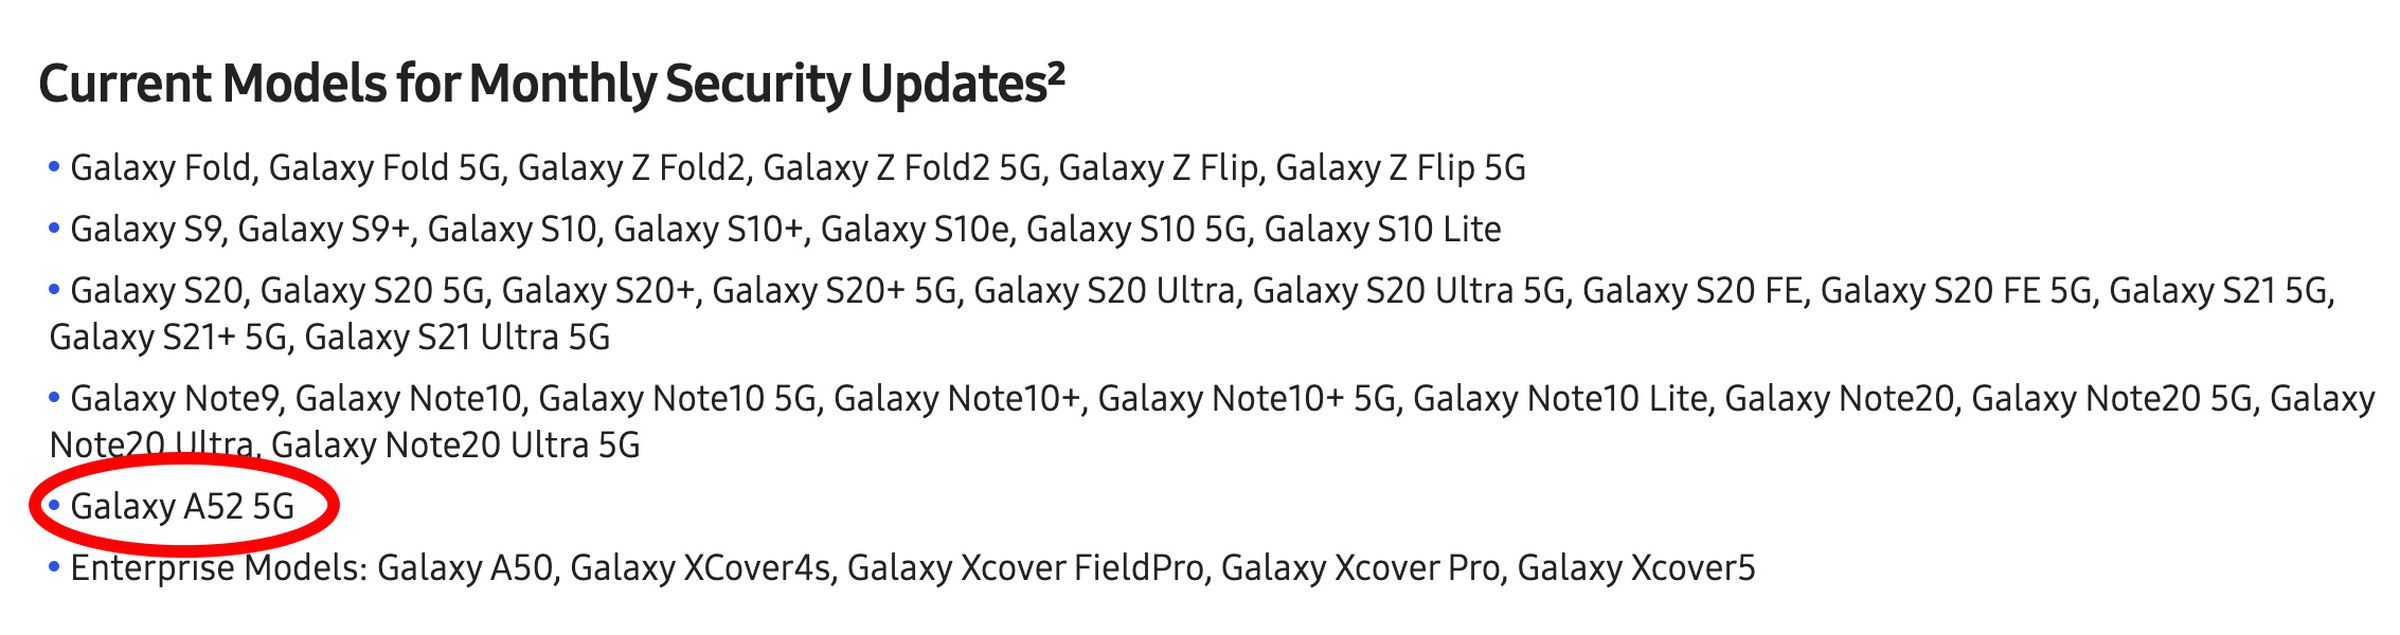 Samsung has listed the unreleased Galaxy A52 5G on a support page.